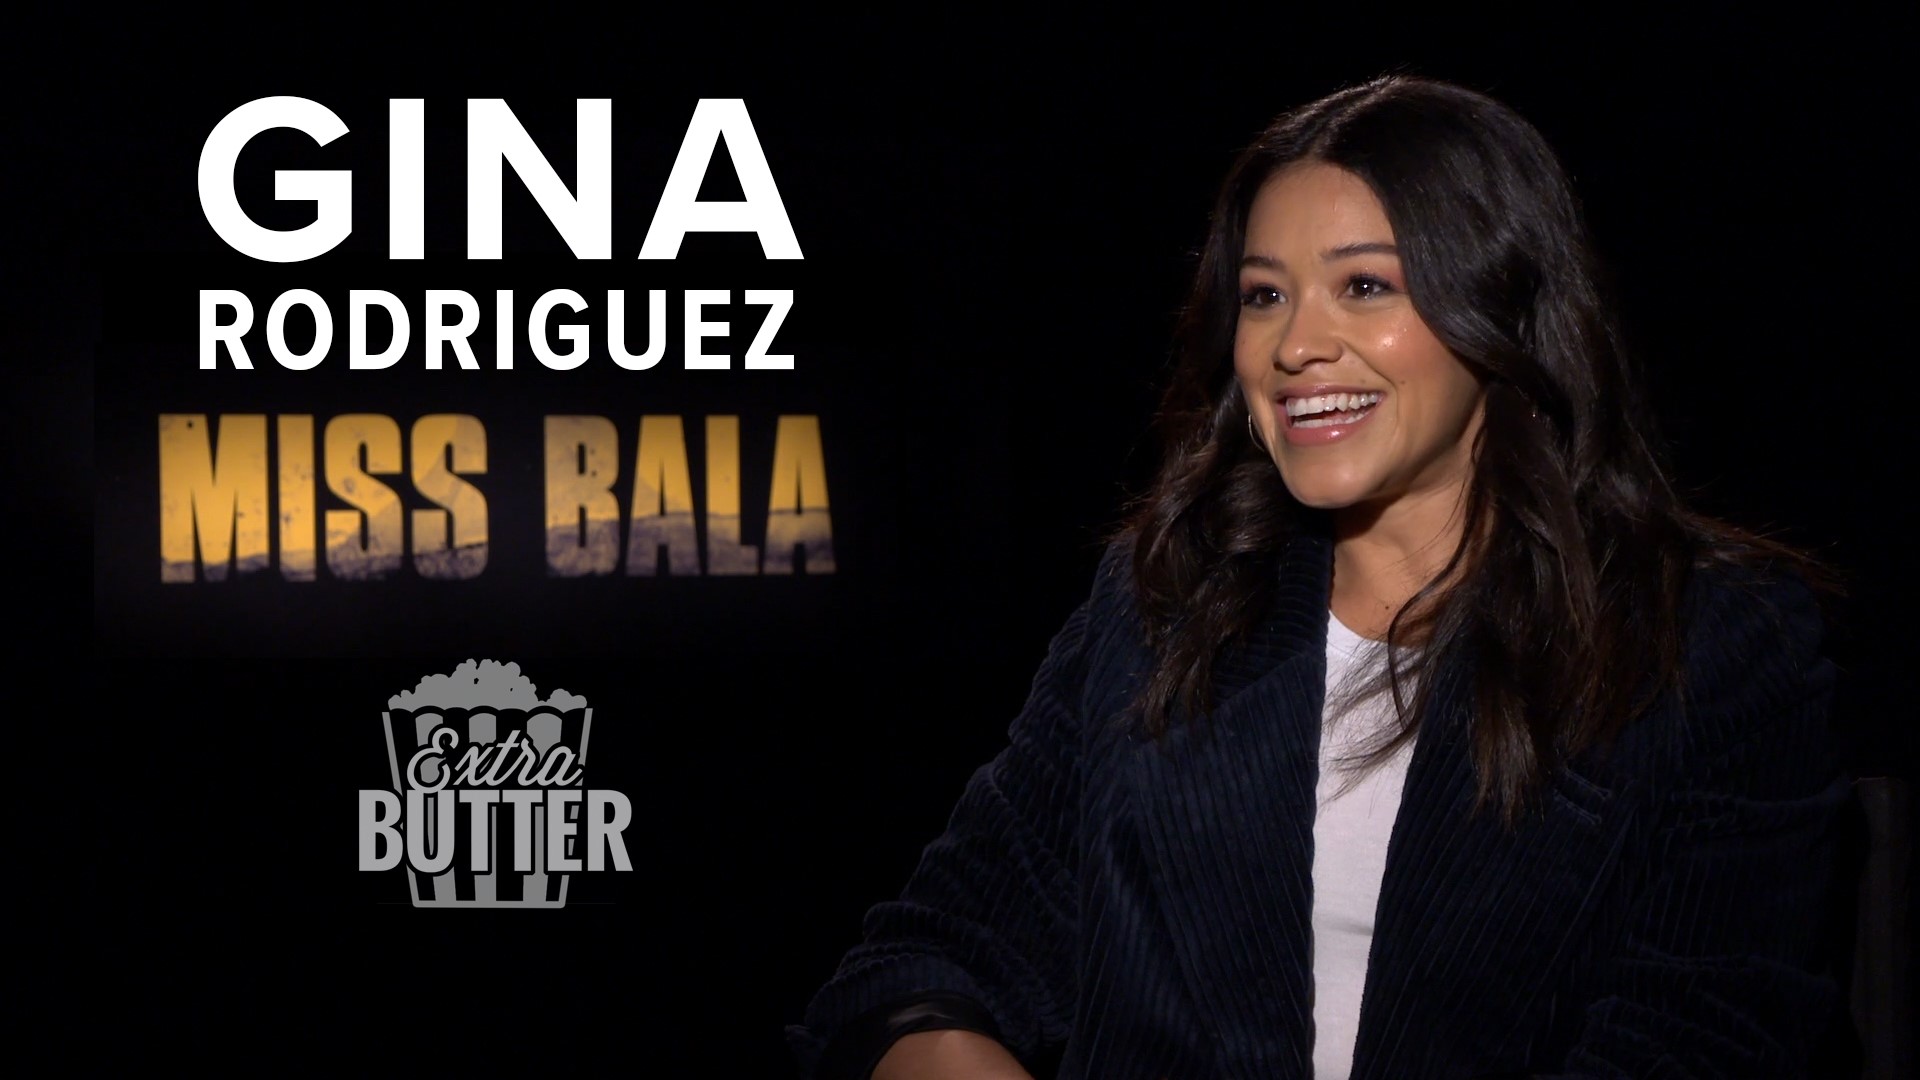 Gina Rodriguez talks about working with an almost all Latin cast and woman director in the action thriller 'Miss Bala.'  Best known for 'Jane the Virgin' and 'Big Mouth,' Gina also talks with Mark S. Allen about her journey from 'Law and Order' to now. Watch Extra Butter every Friday morning at 9:30 a.m. on ABC 10. Interview arranged by Sony Pictures Releasing.